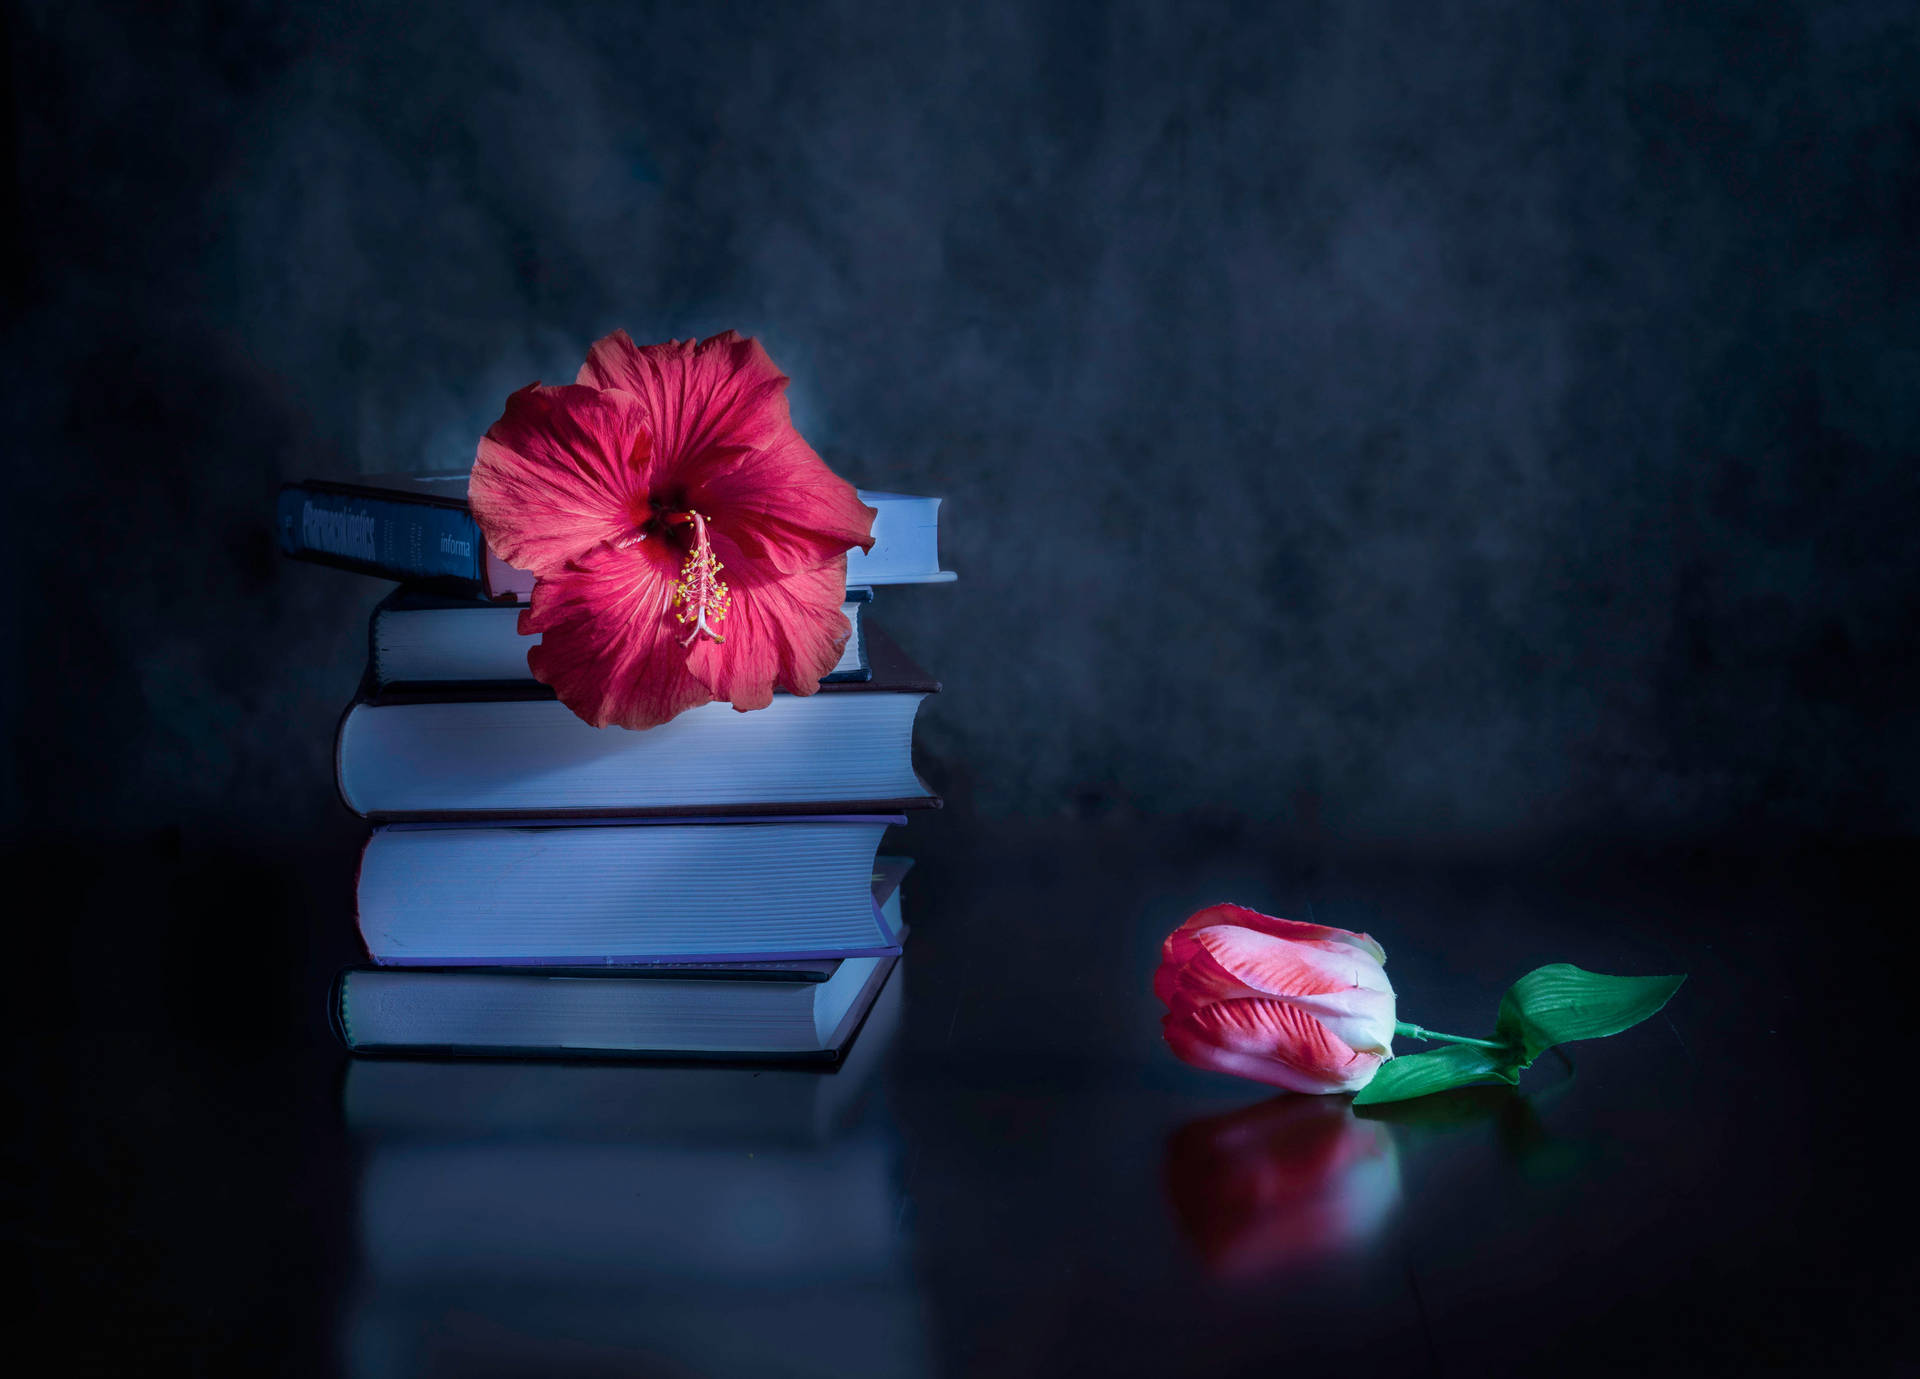 Dark Pink Floral And Books Background